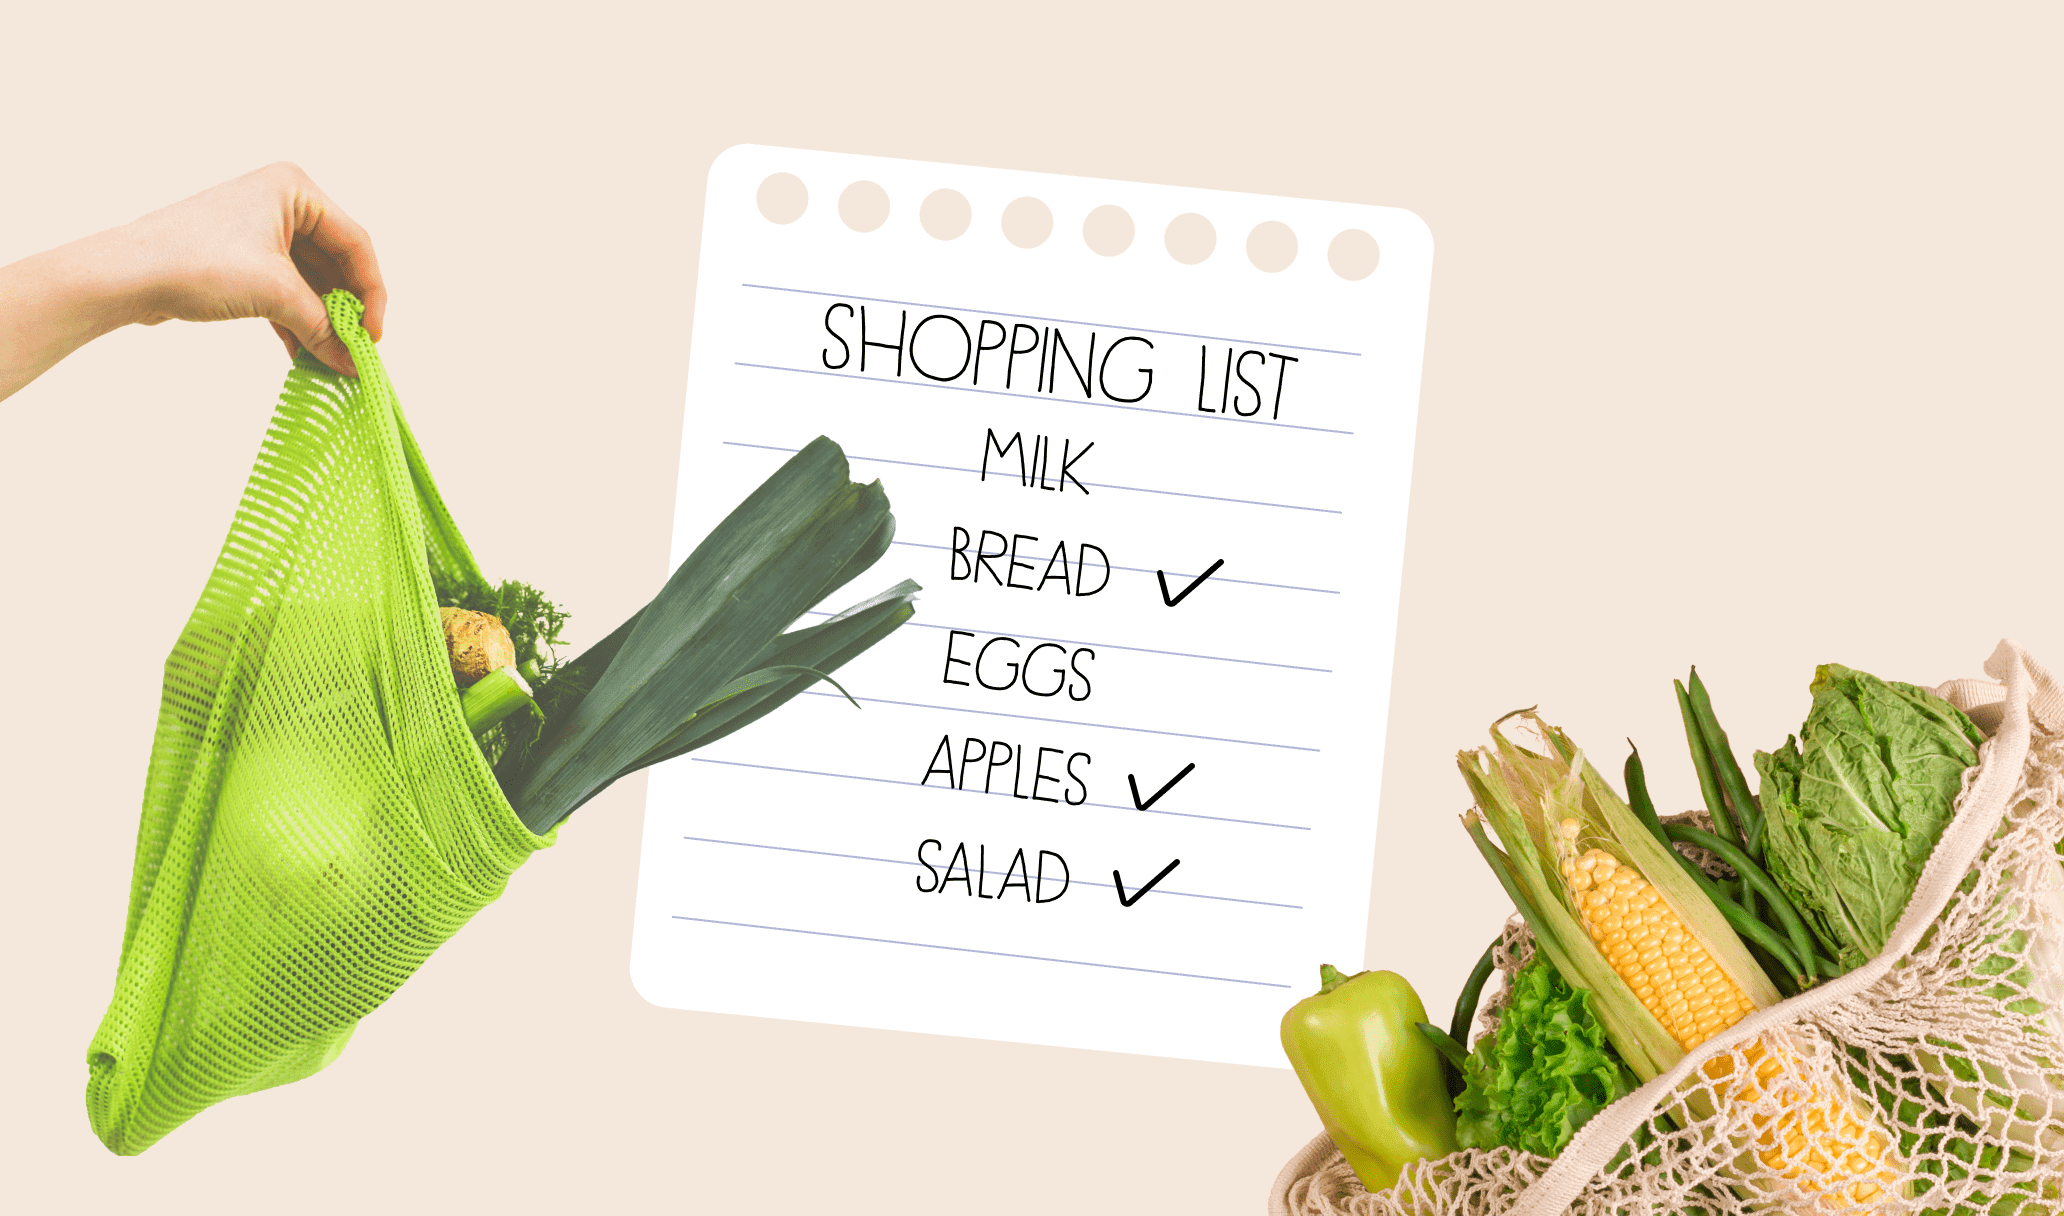 Shopping list is the best way to avoid impulsive buying.